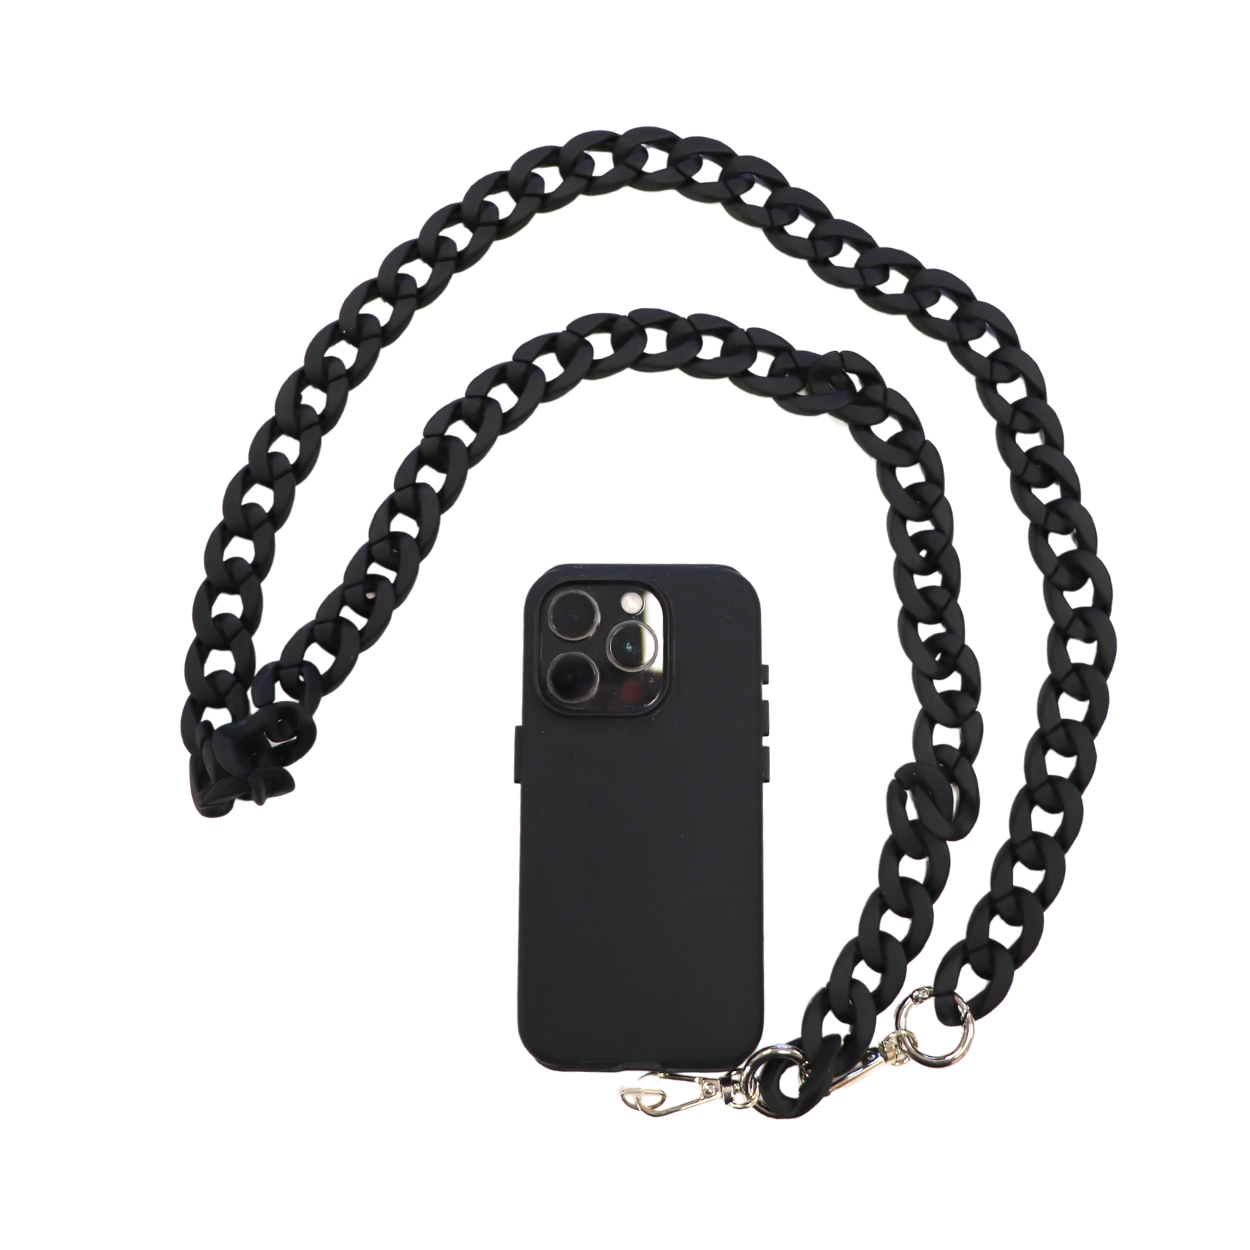 KEERA - CELL PHONE CHAIN